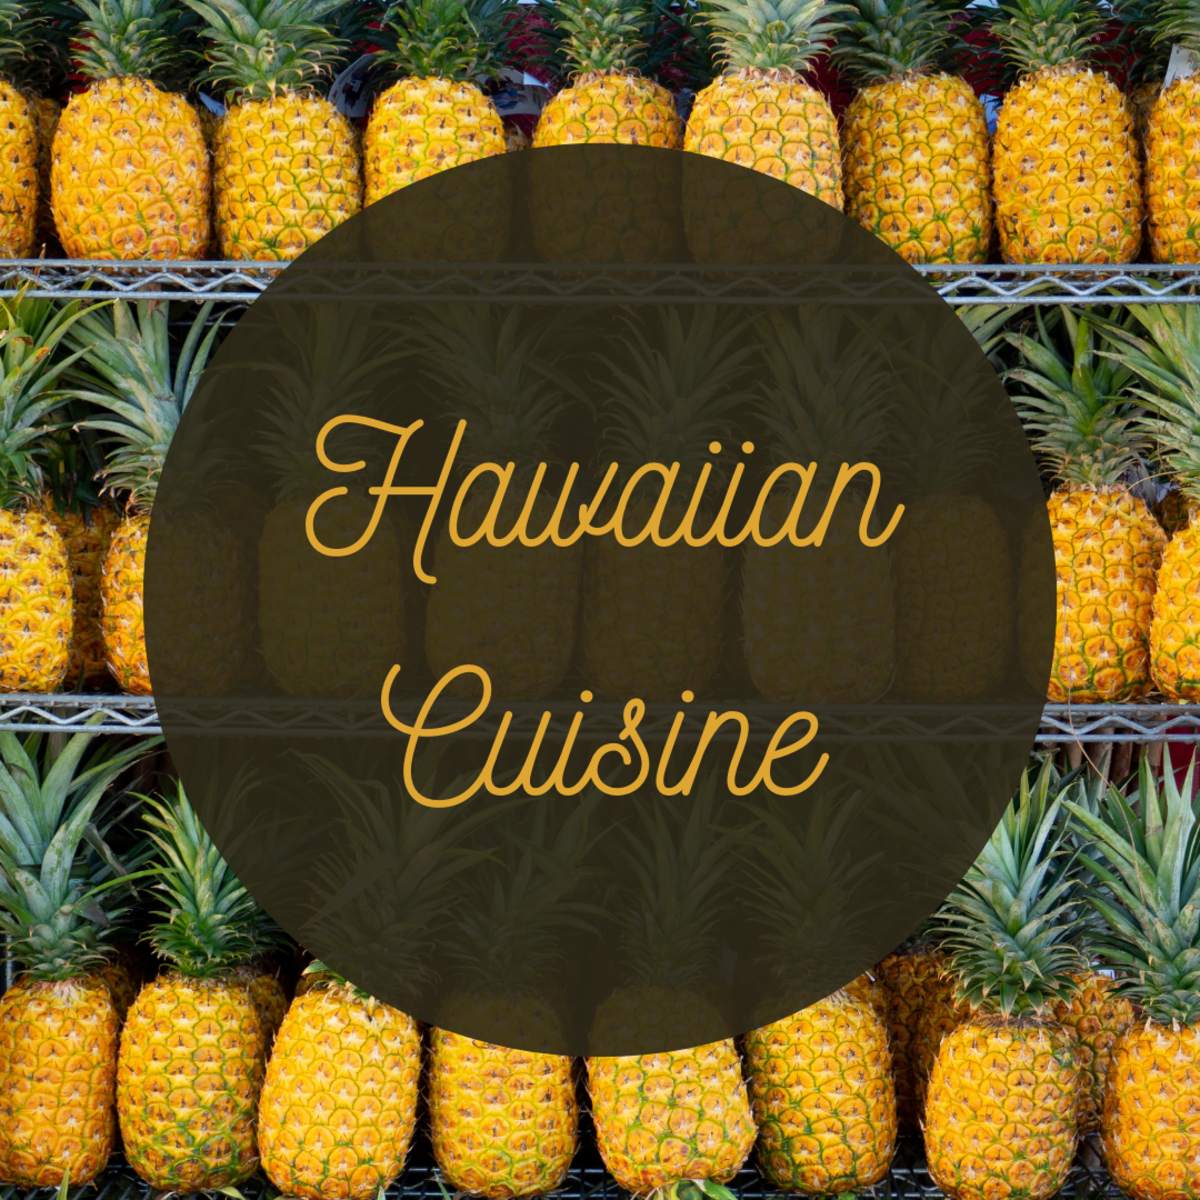 From the traditional lu'au to the modern plate lunch, Hawaiian cuisine has changed dramatically over time.